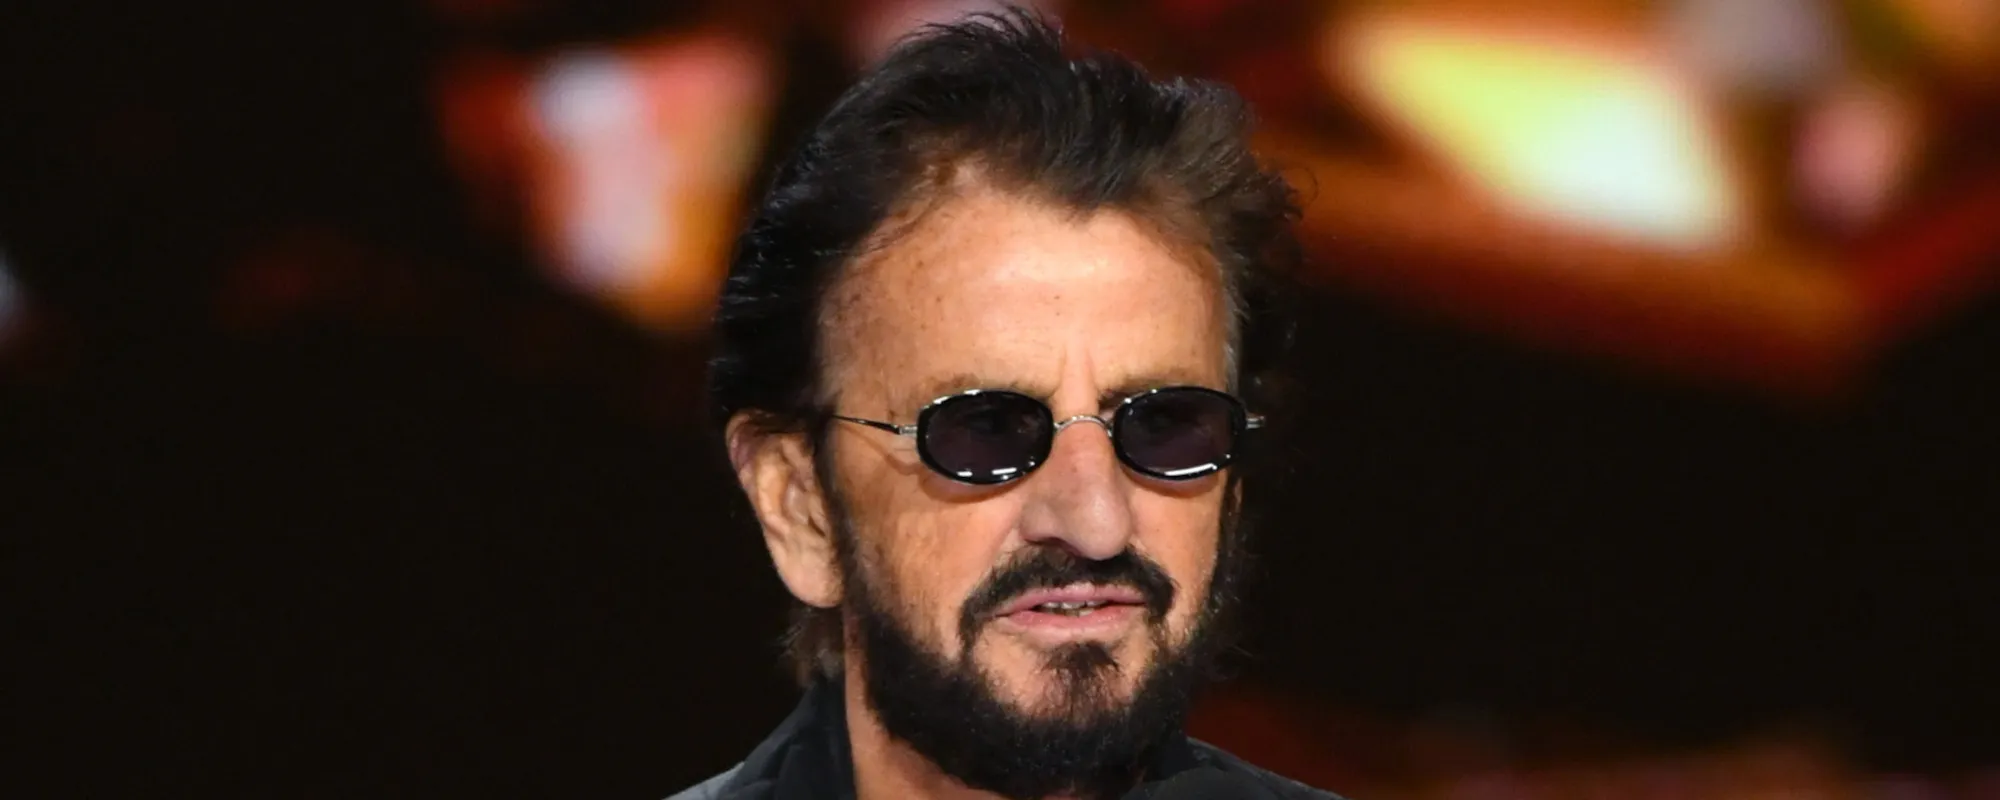 Ringo Extends 2022 North American Tour